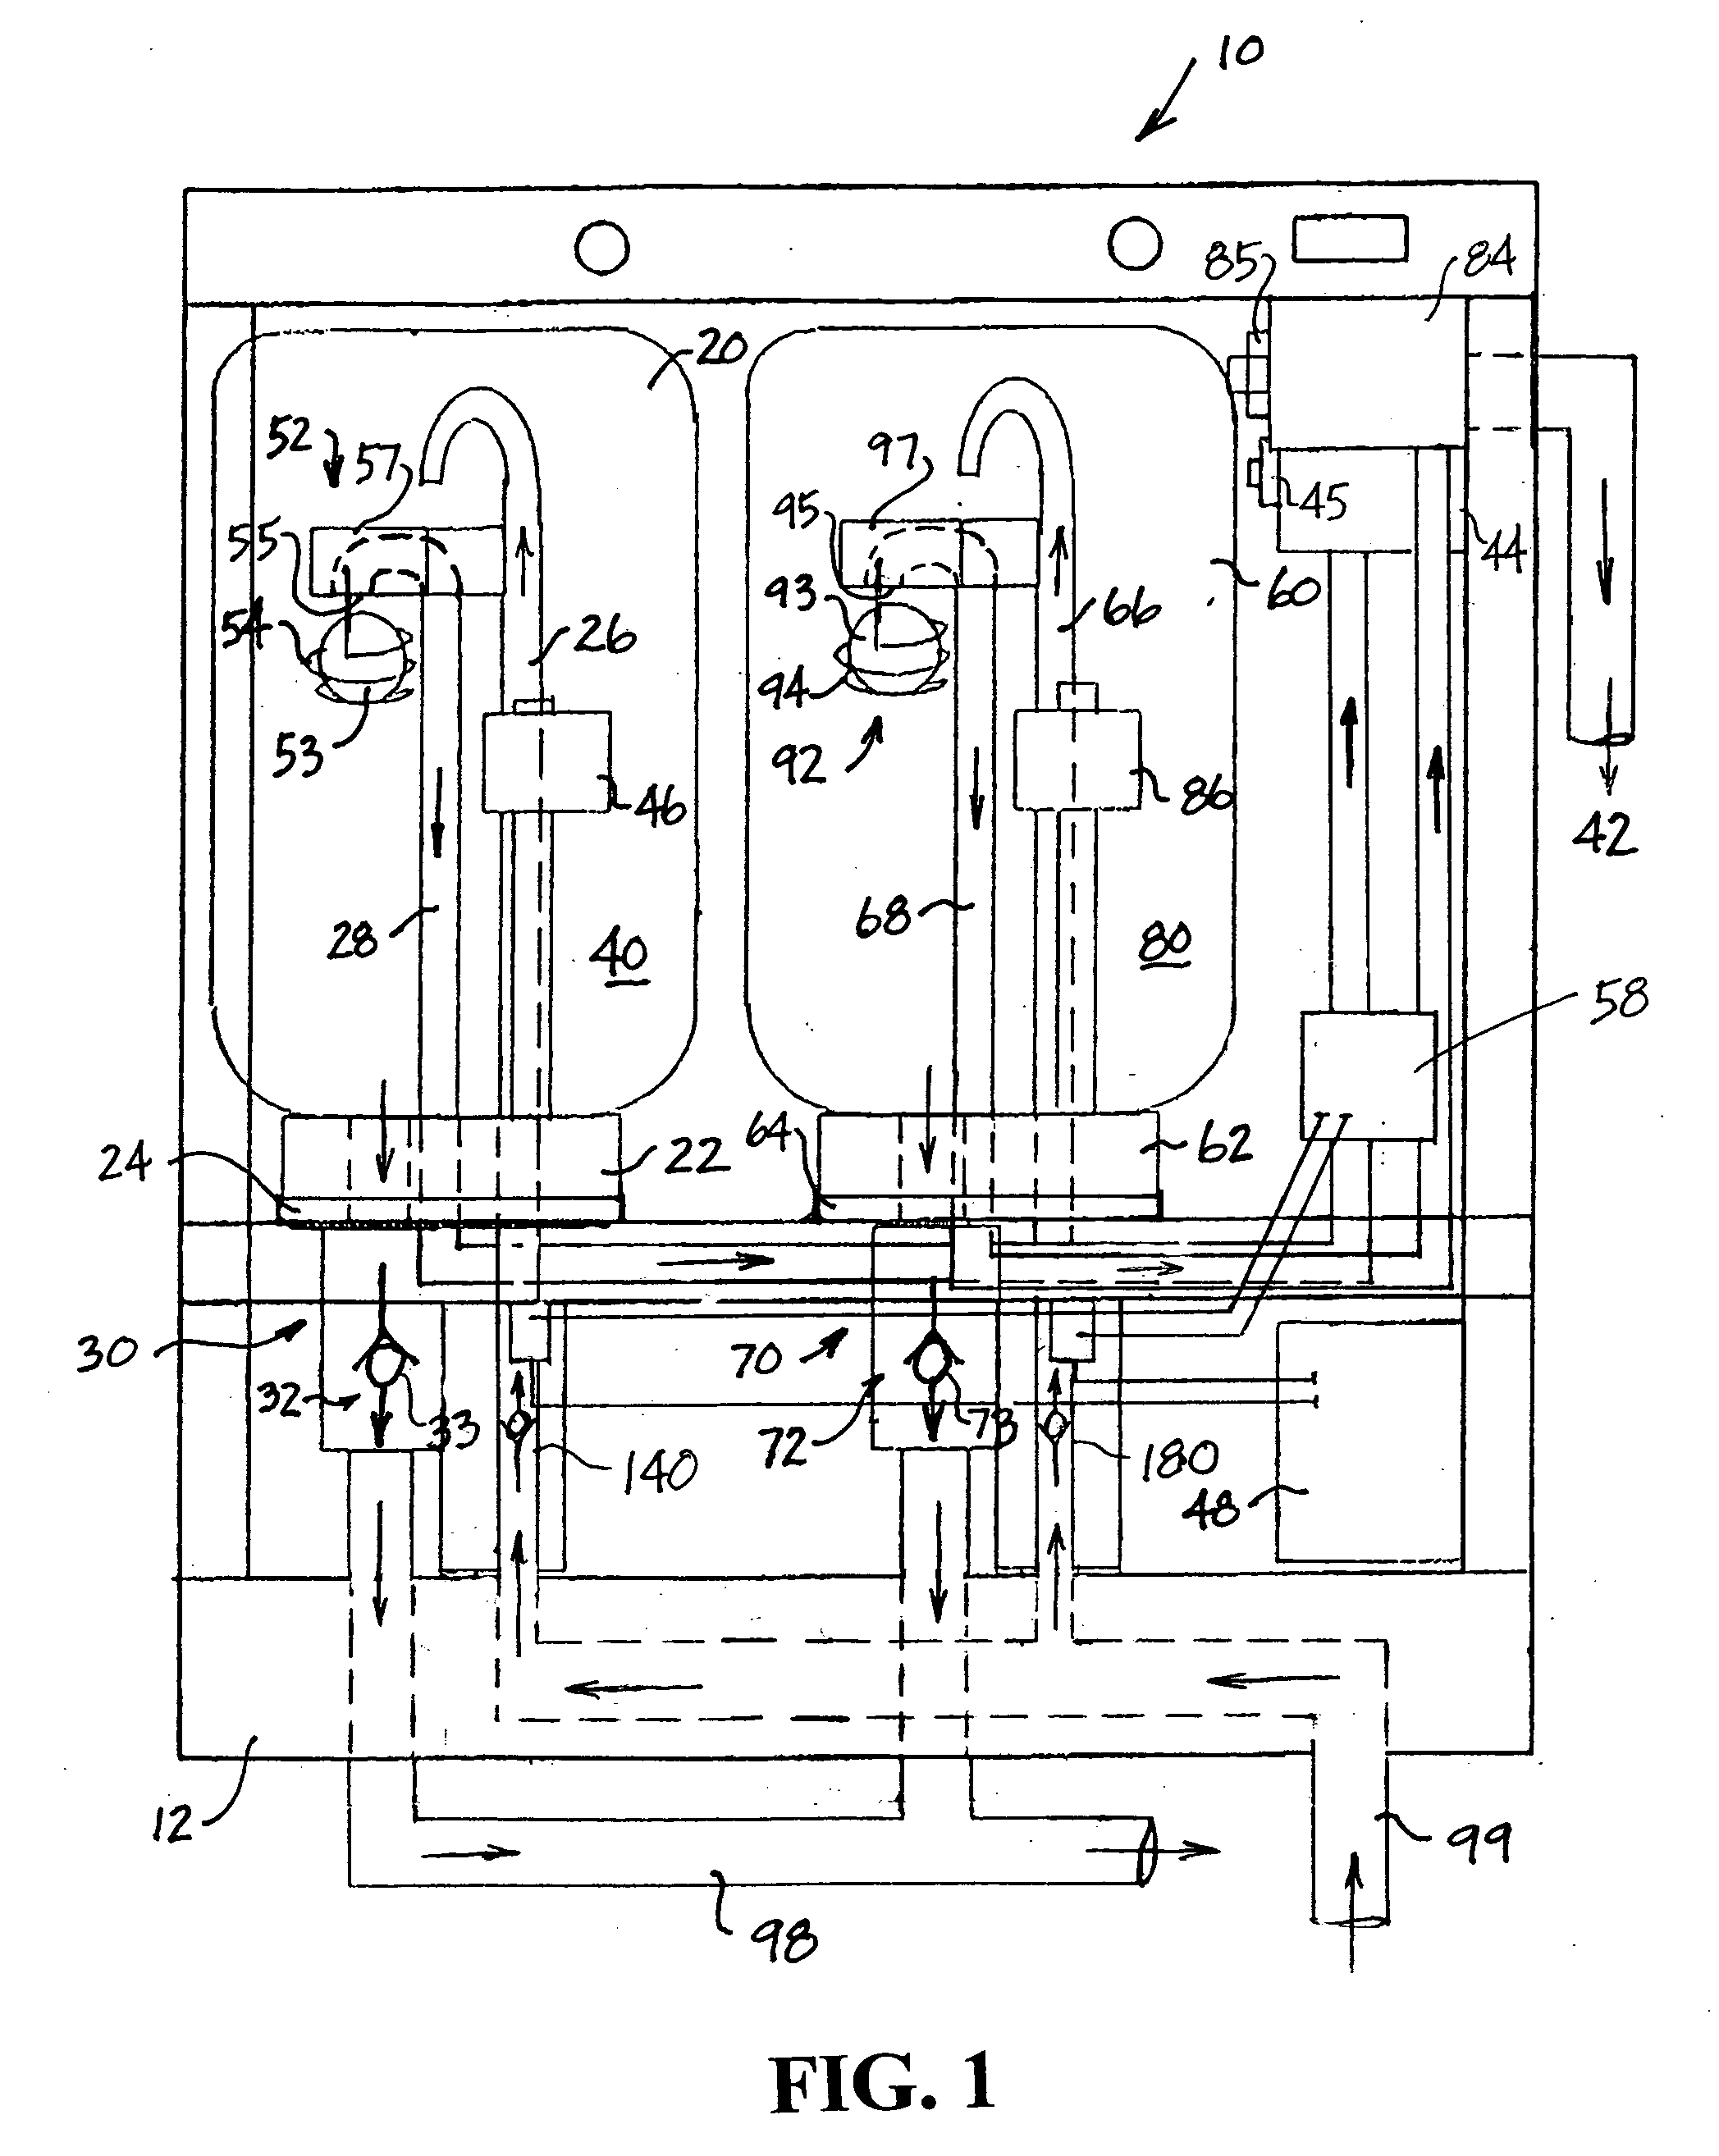 Apparatus for continuously aspirating a fluid from a fluid source